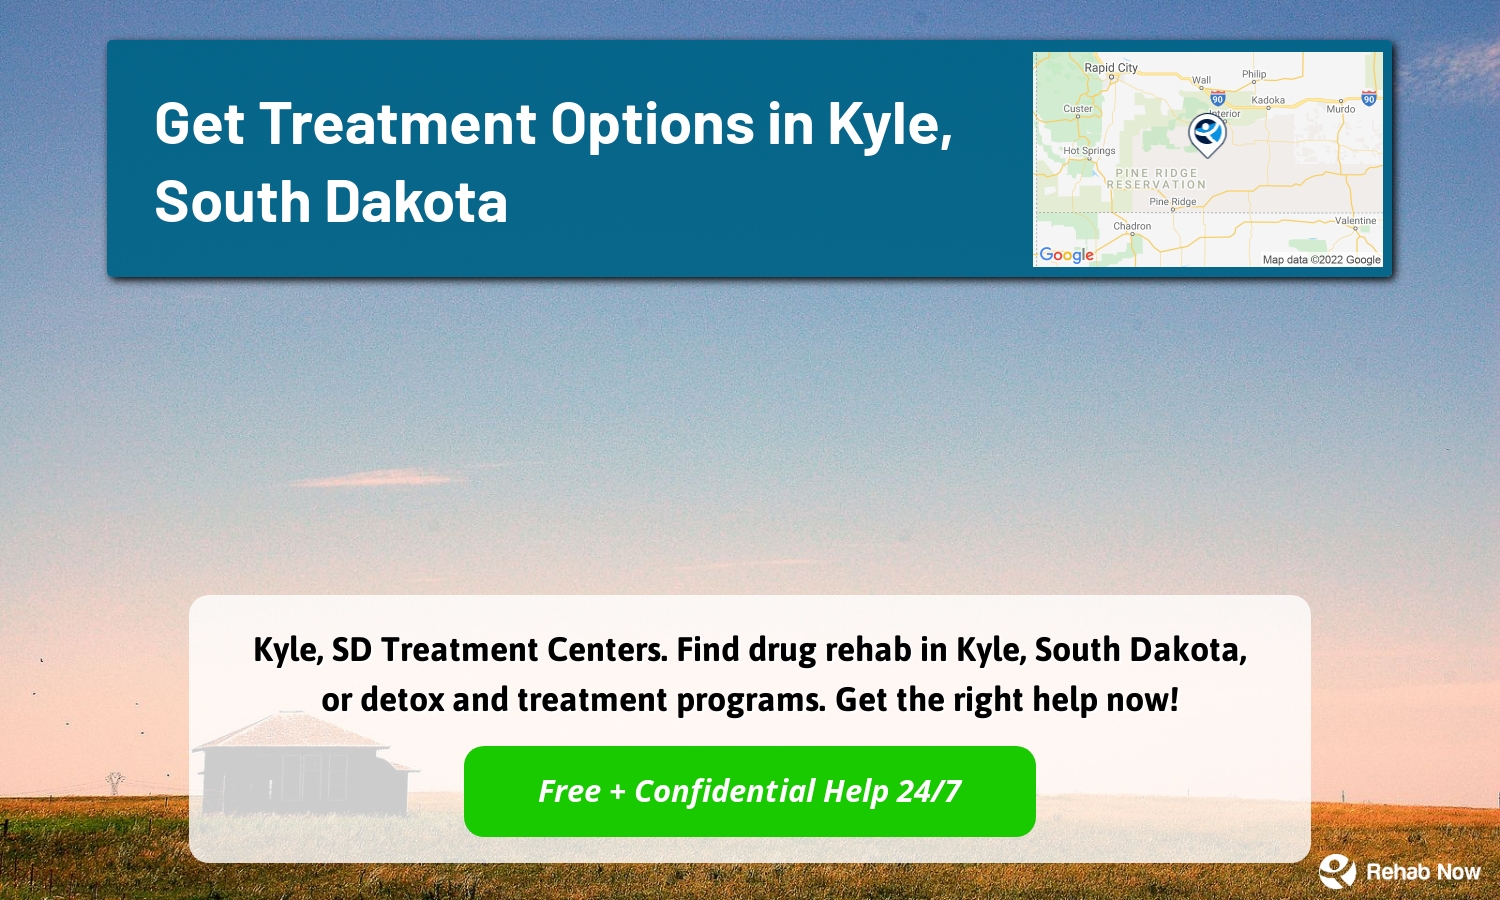 Kyle, SD Treatment Centers. Find drug rehab in Kyle, South Dakota, or detox and treatment programs. Get the right help now!